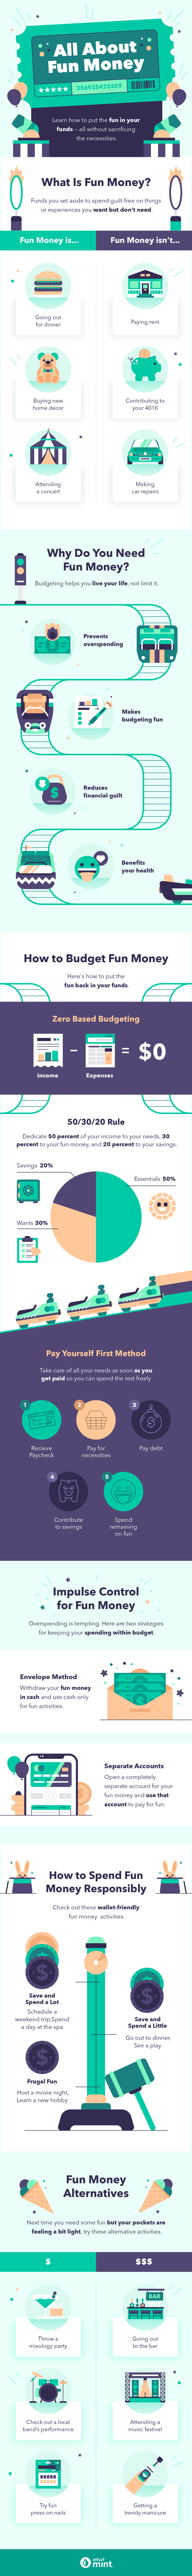 An infographic defines fun money and describes budgeting strategies like zero-based budgeting, the 50/30/20 rule, and the pay yourself first method to help save for fun money.